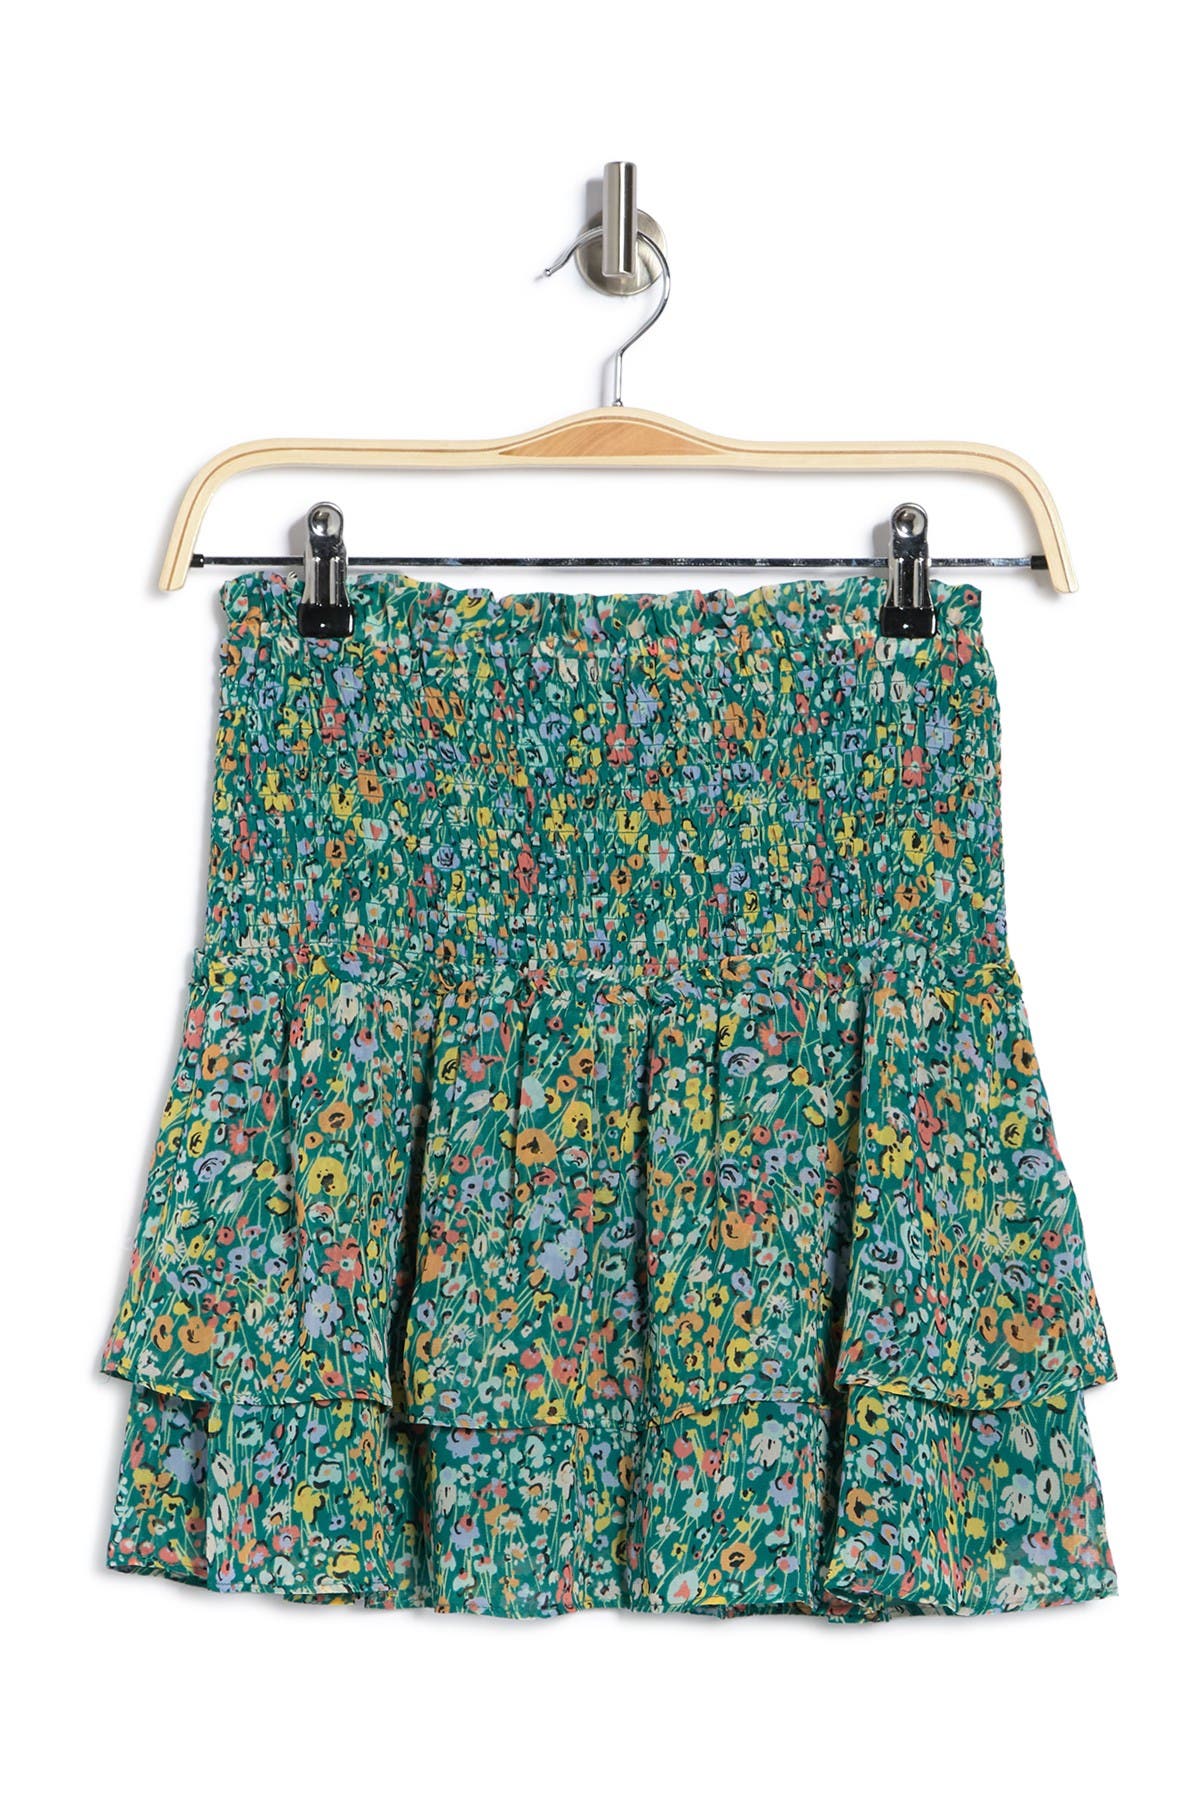 19 Cooper Woven Skirt In Green Floral